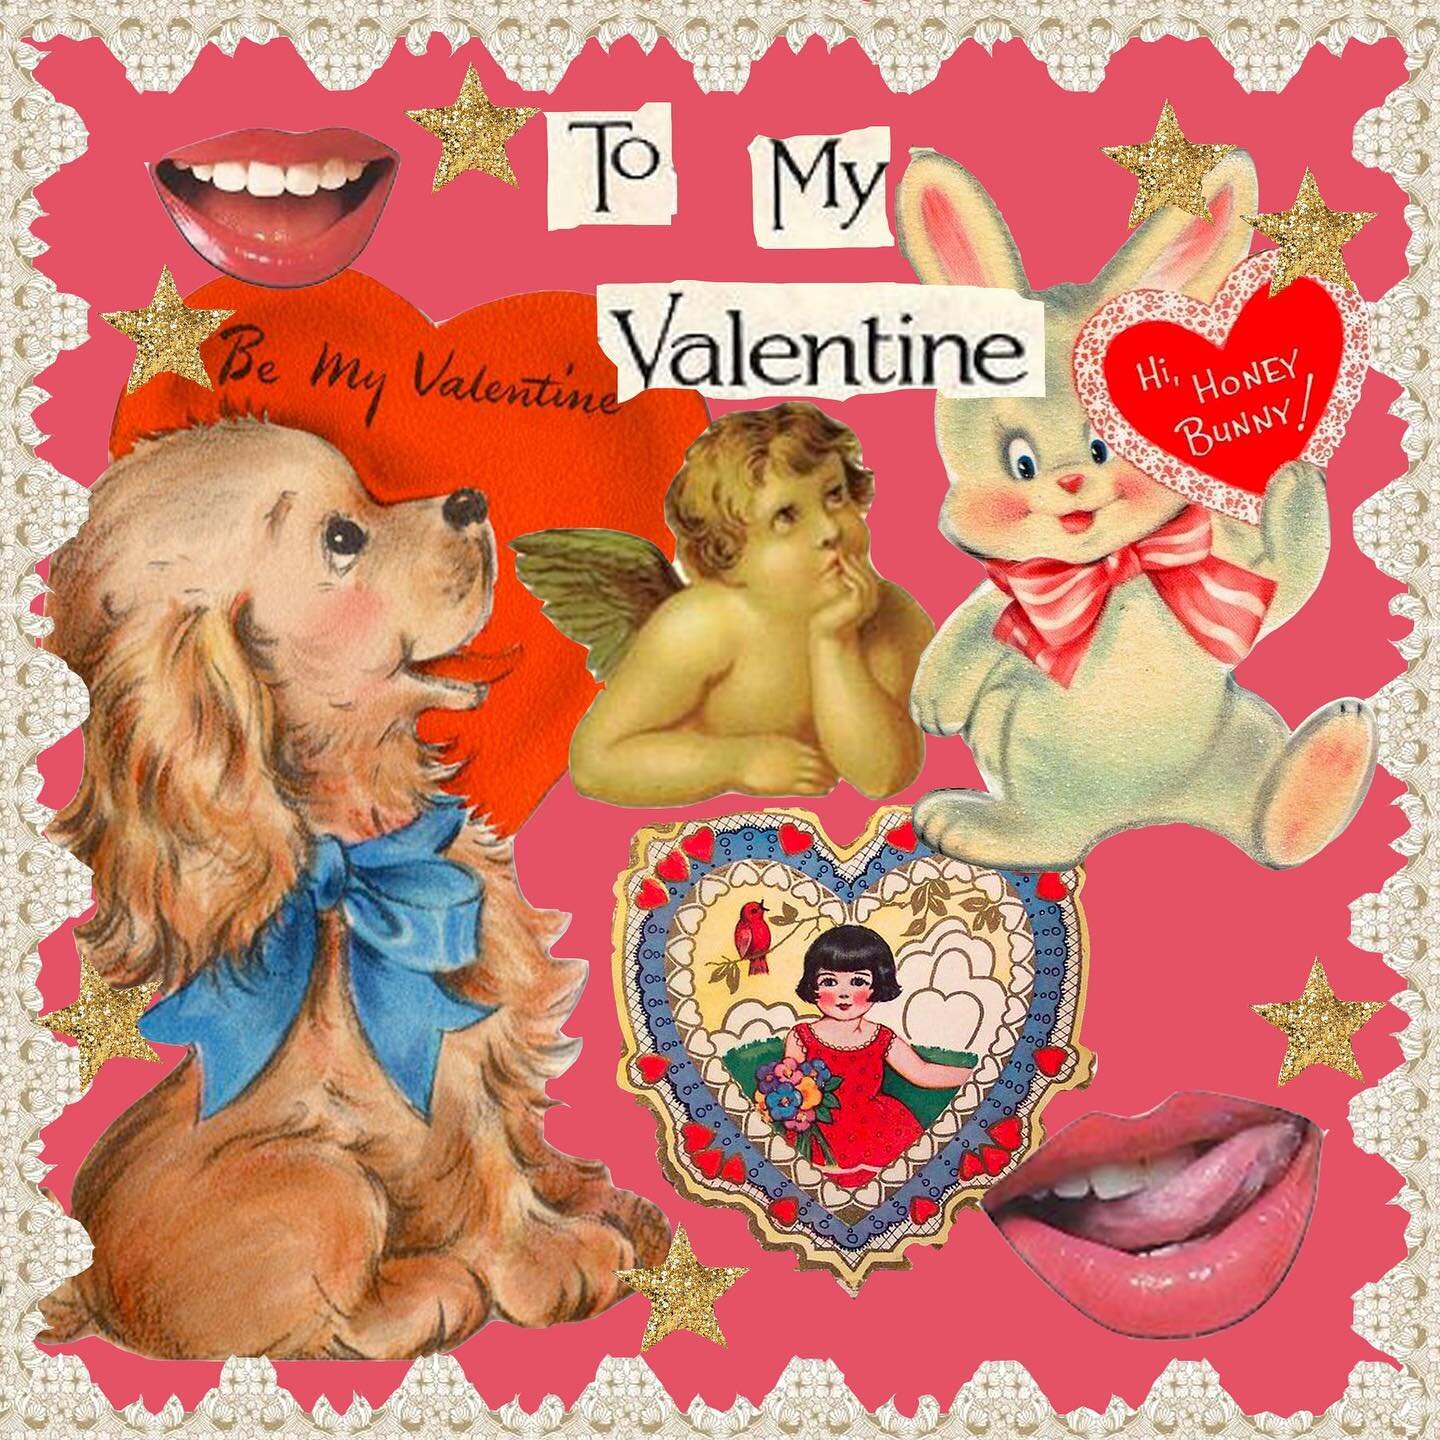 2022 valentines&rsquo;s day playlist now on our spotify!!! xoxo 
💝🧸💌🍓⭐️💐🦢
playlist by @maybeingreallycool 
art by @witchabitcha 
#valentines #collageart #playlist #vintage #playlistspotify